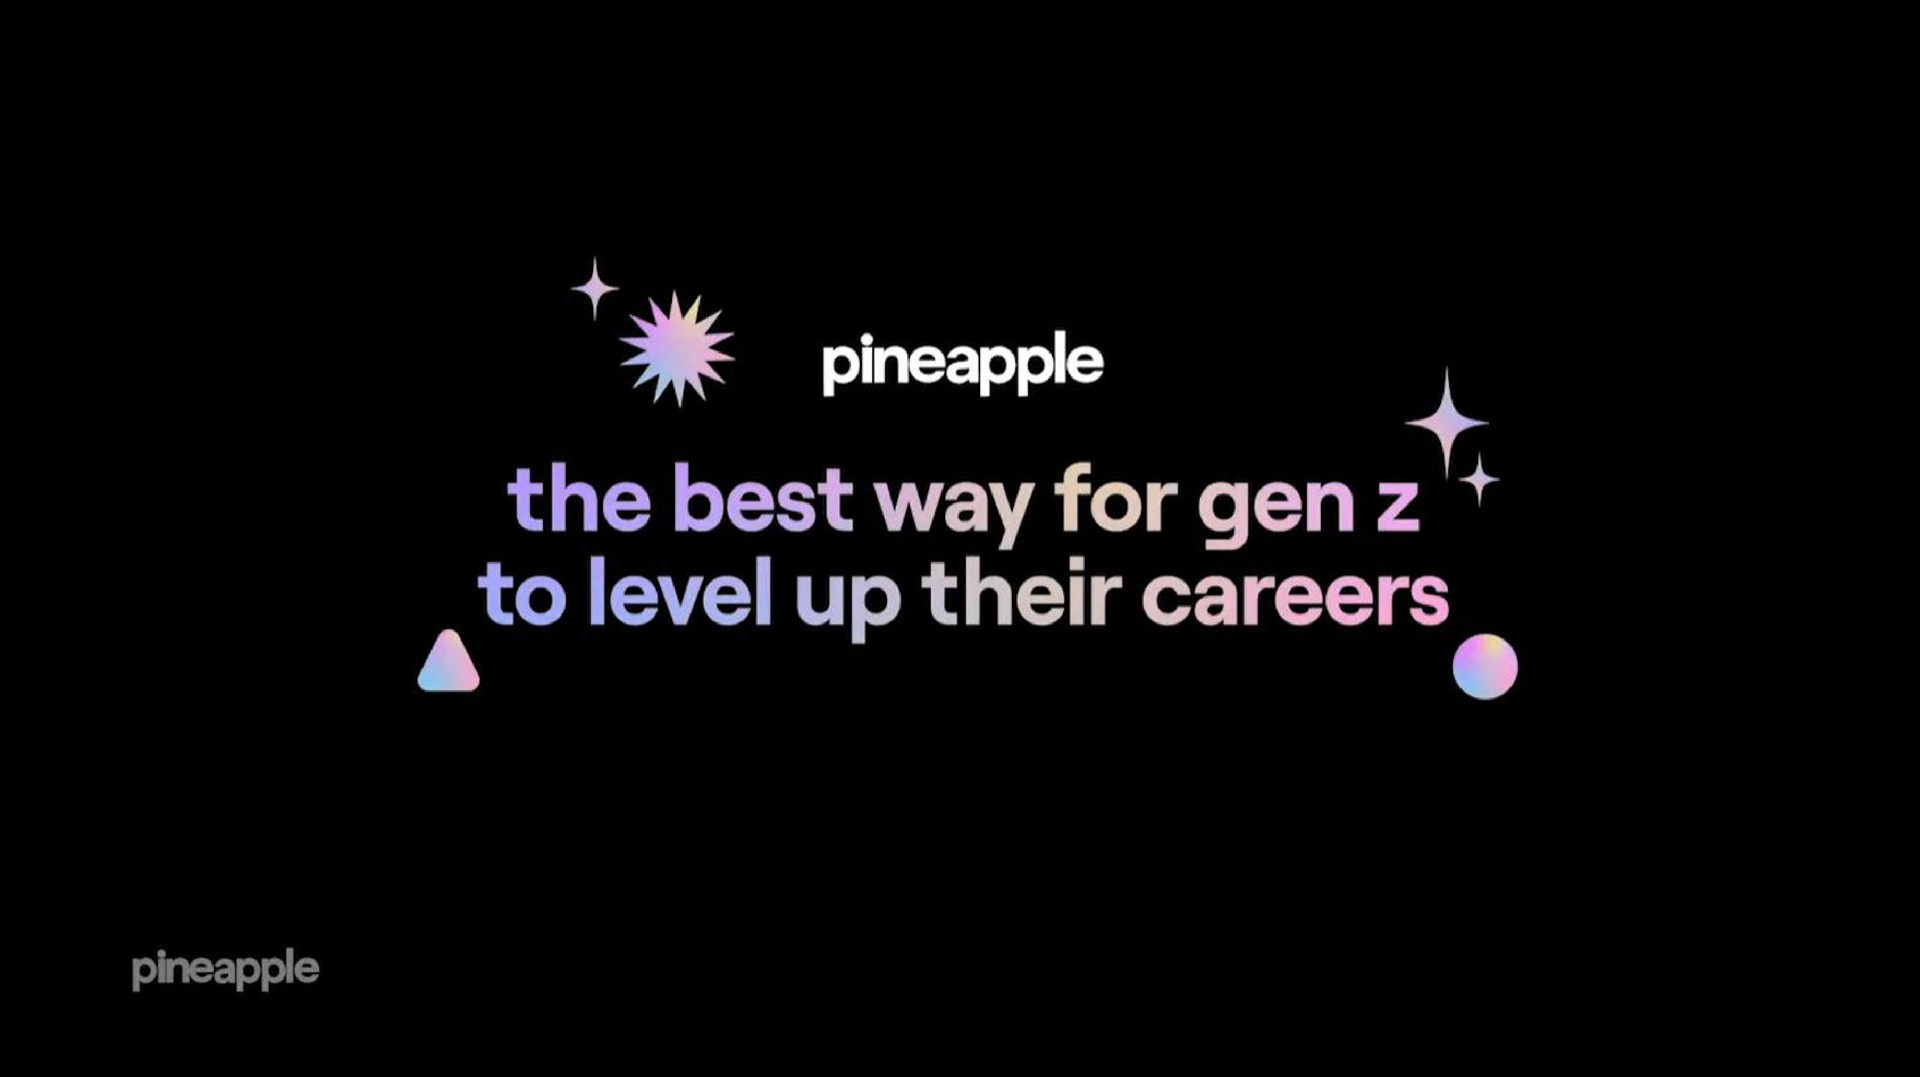 pineapple the best way for gen level up their careers pineapple | Pineapple